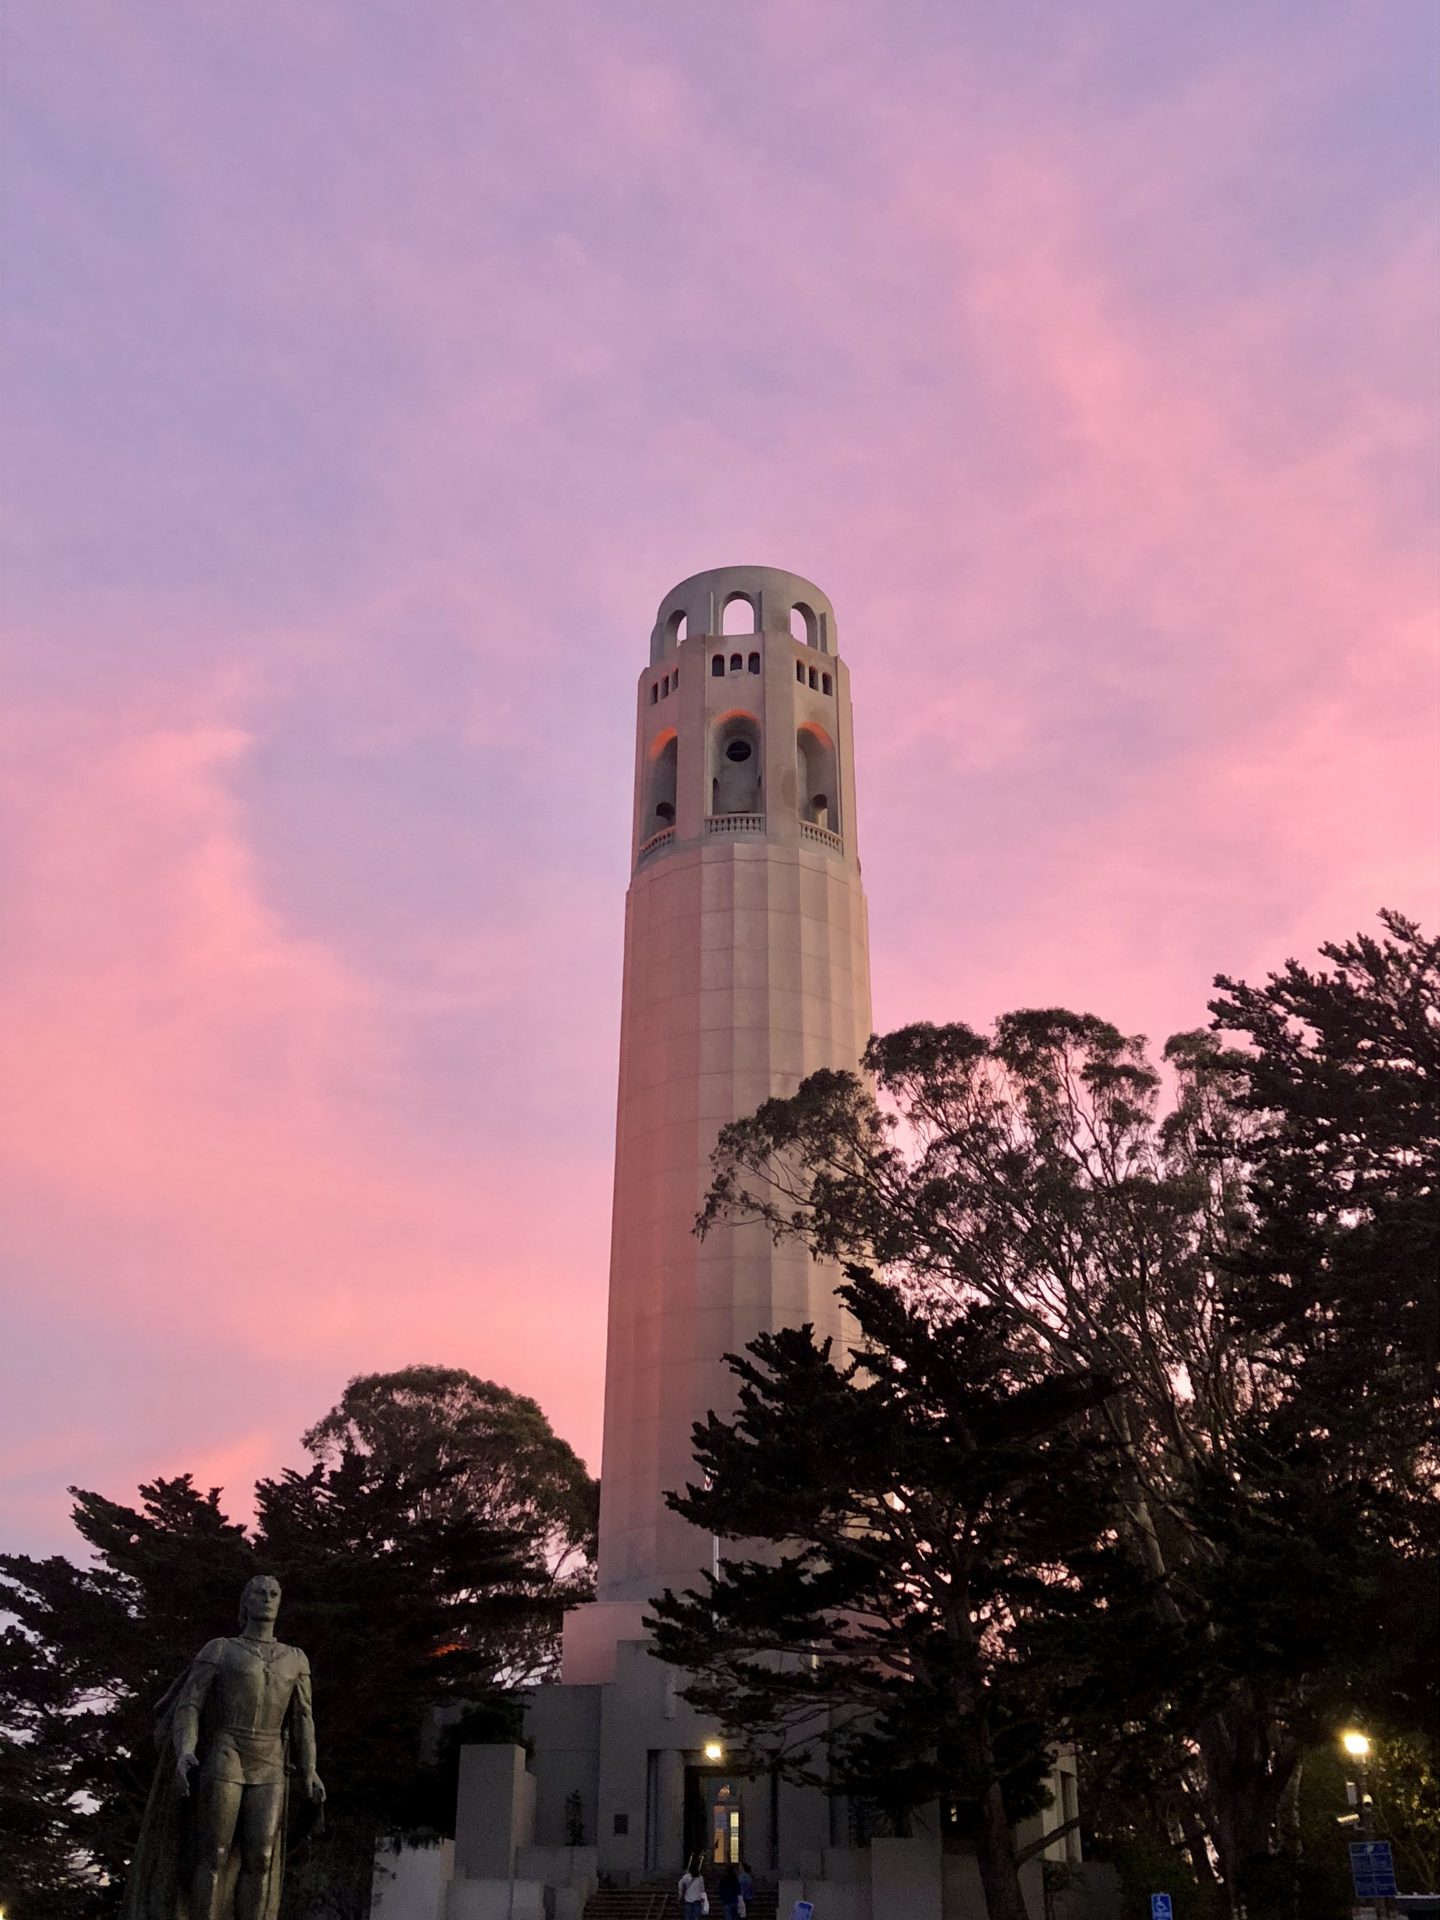 Pink skies over the Coit Tower, San Francisco